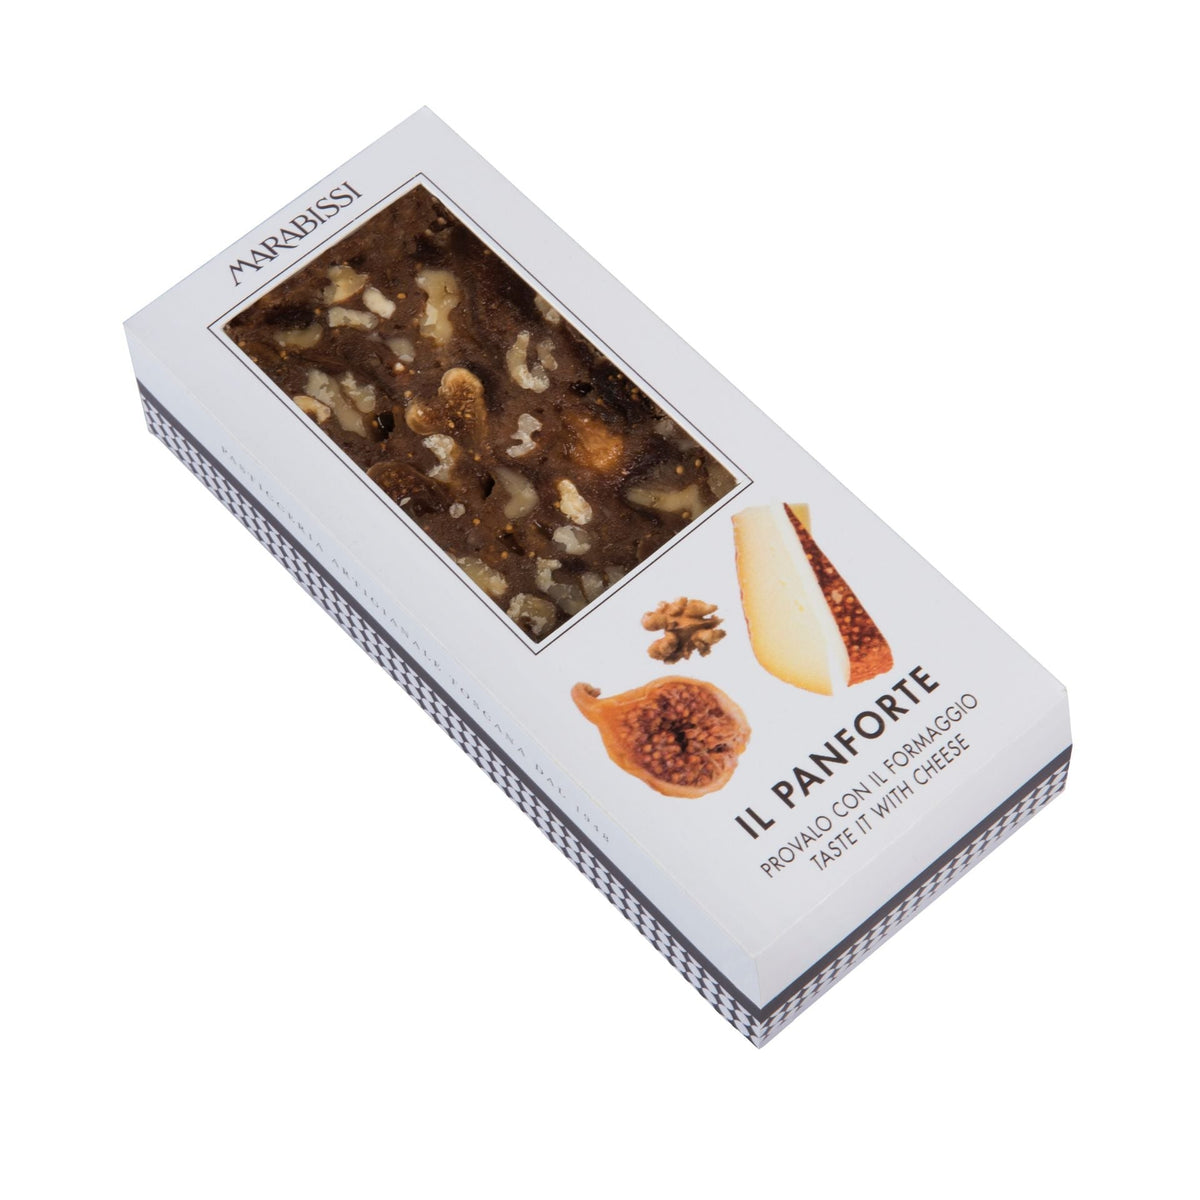 Marabissi Fig &amp; Walnut Panforte Cake (Box) 200g  | Imported and distributed in the UK by Just Gourmet Foods